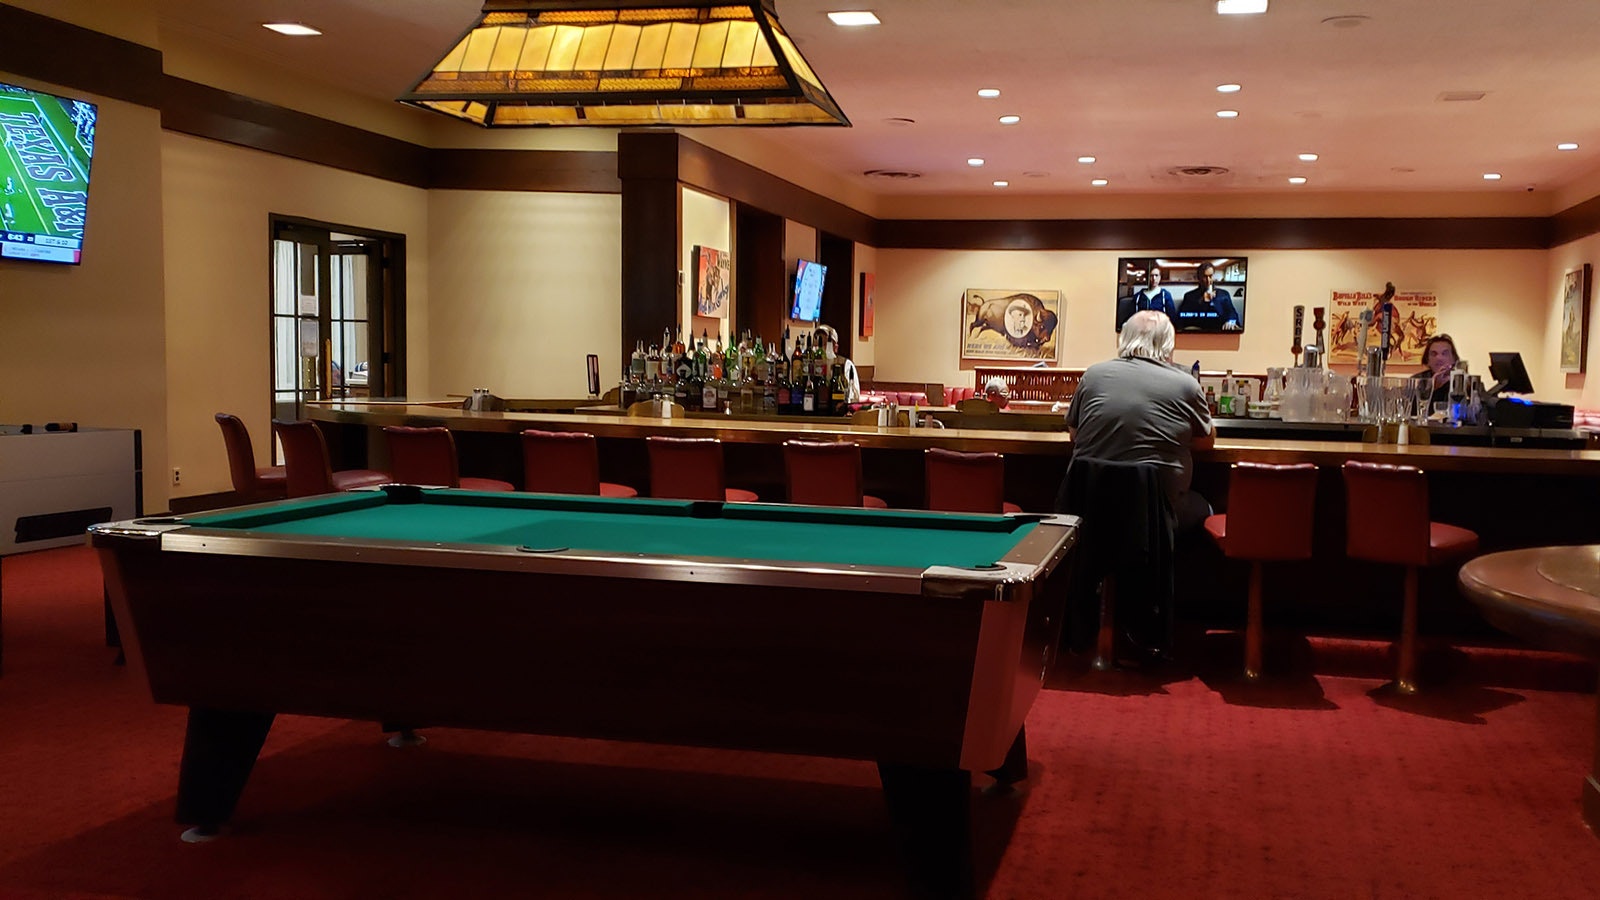 Pool tables and the bar inside Little America.